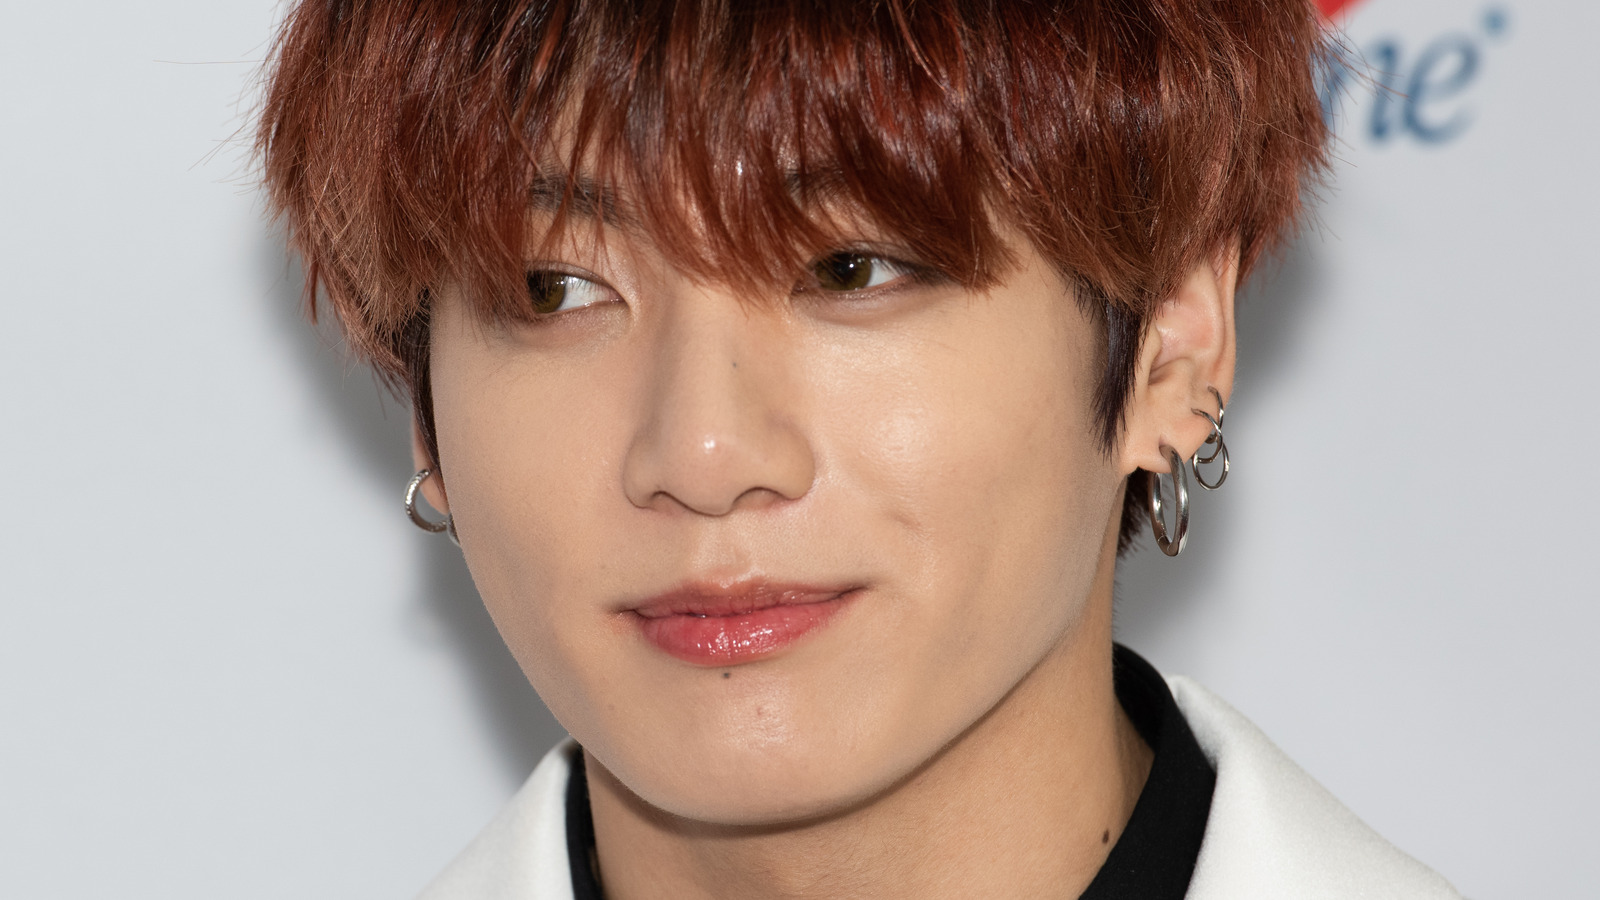 Why Jungkook From BTS Won't Reveal All Of His Tattoos